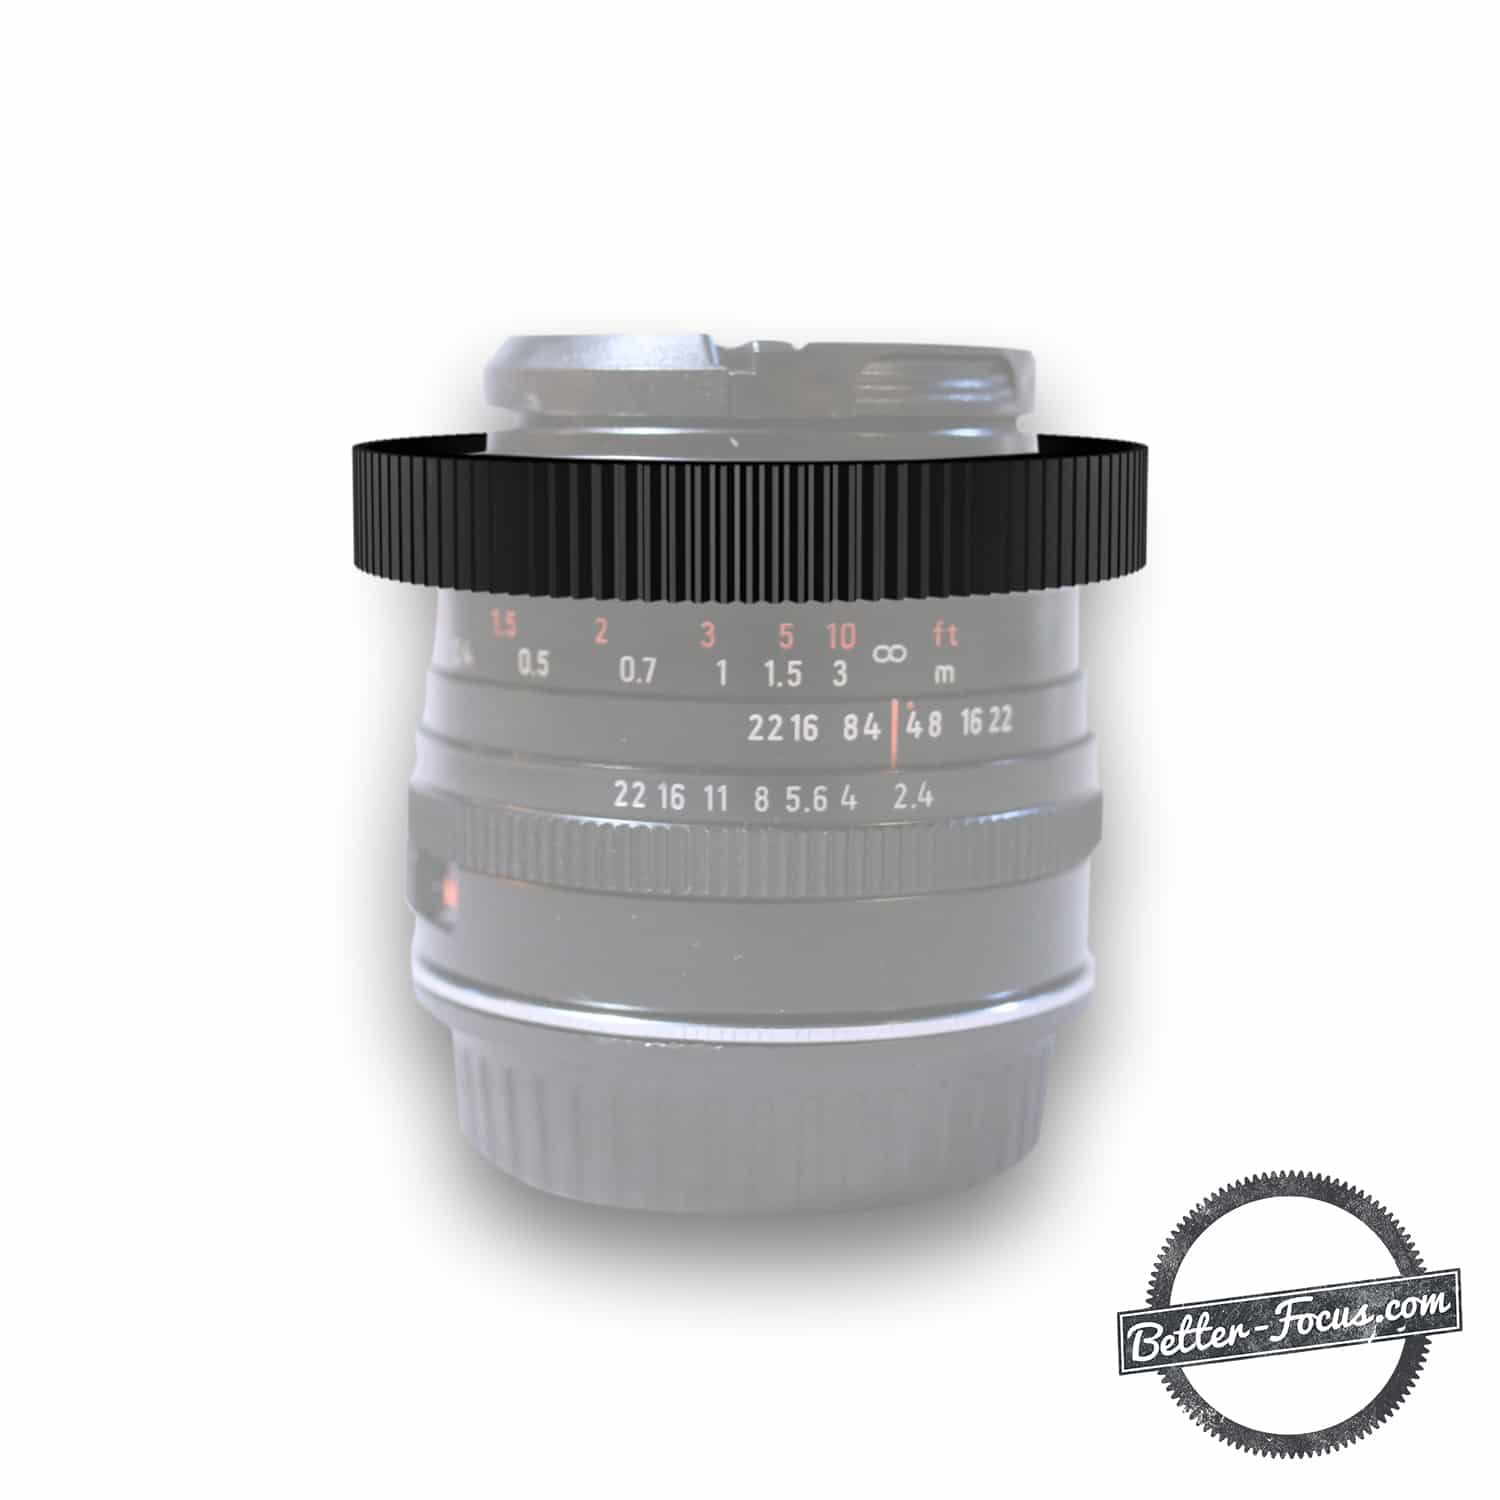 Perfect fitting Follow Focus Gear for CARL ZEISS JENA 35MM F2.4 DDR  FLEKTOGON AUTO MC (WHITE LETTERING) lens